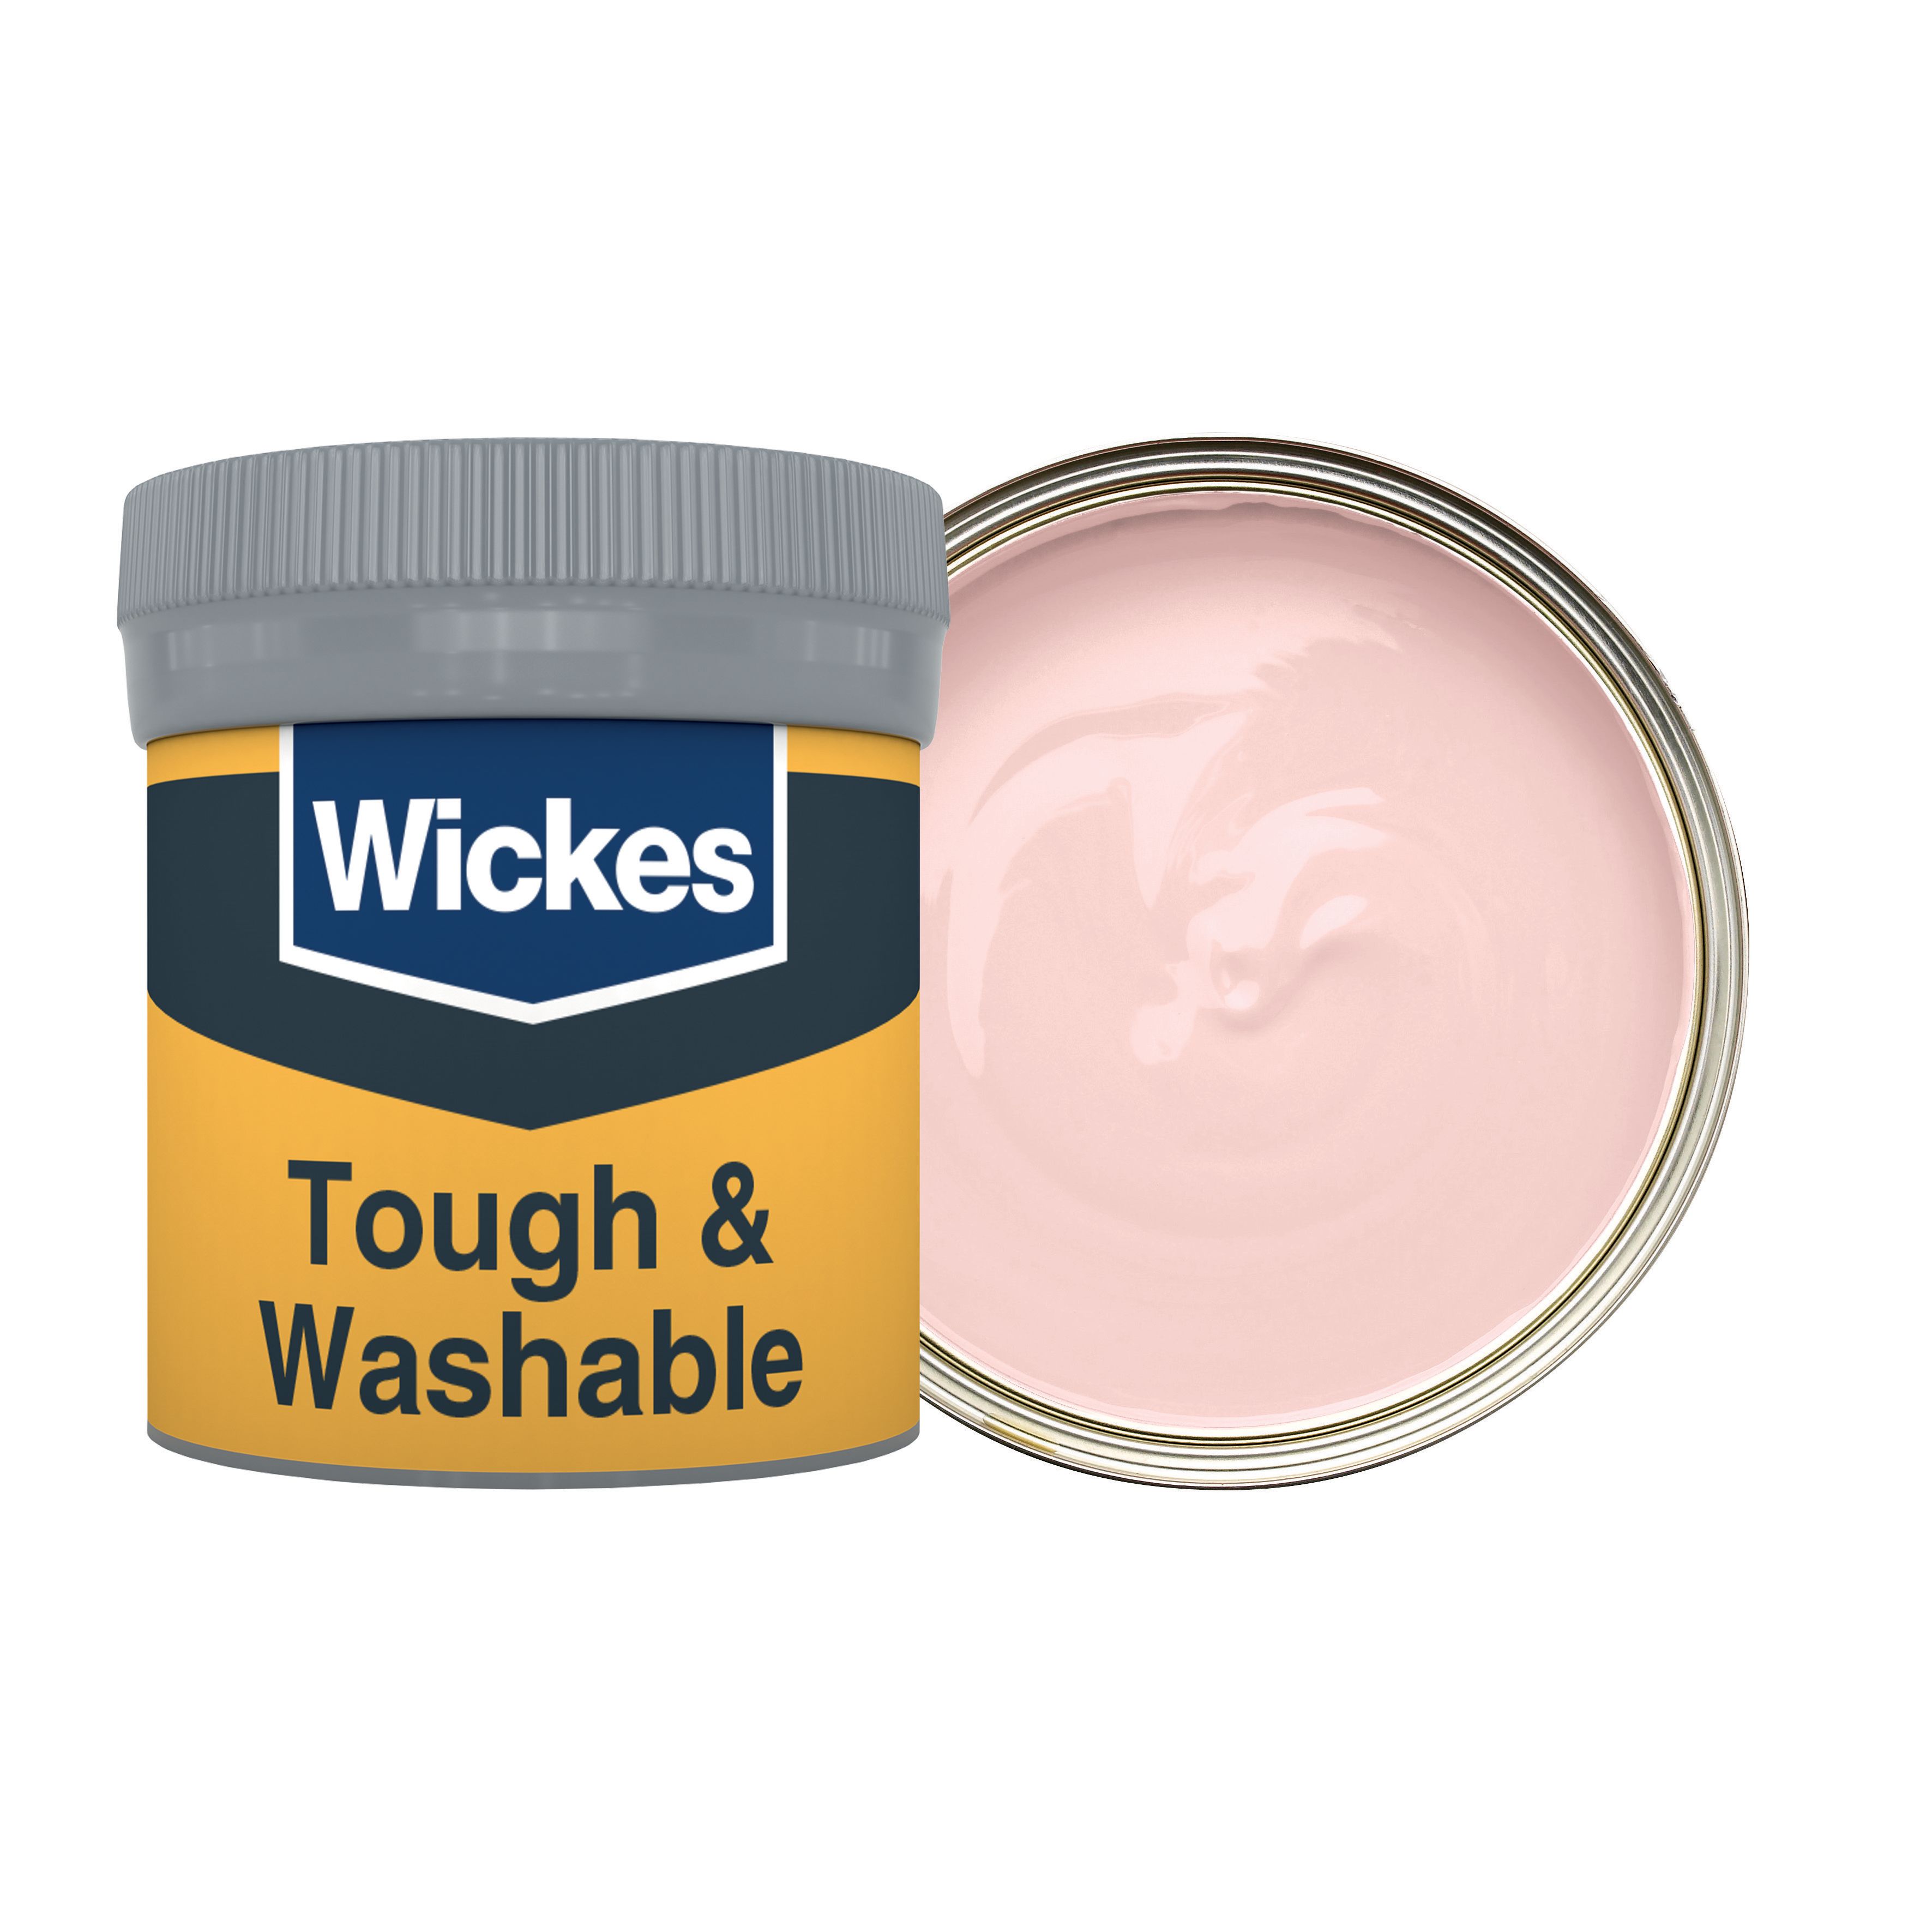 Image of Wickes Tough & Washable Matt Emulsion Paint Tester Pot - Poetic Pink No.605 - 50ml